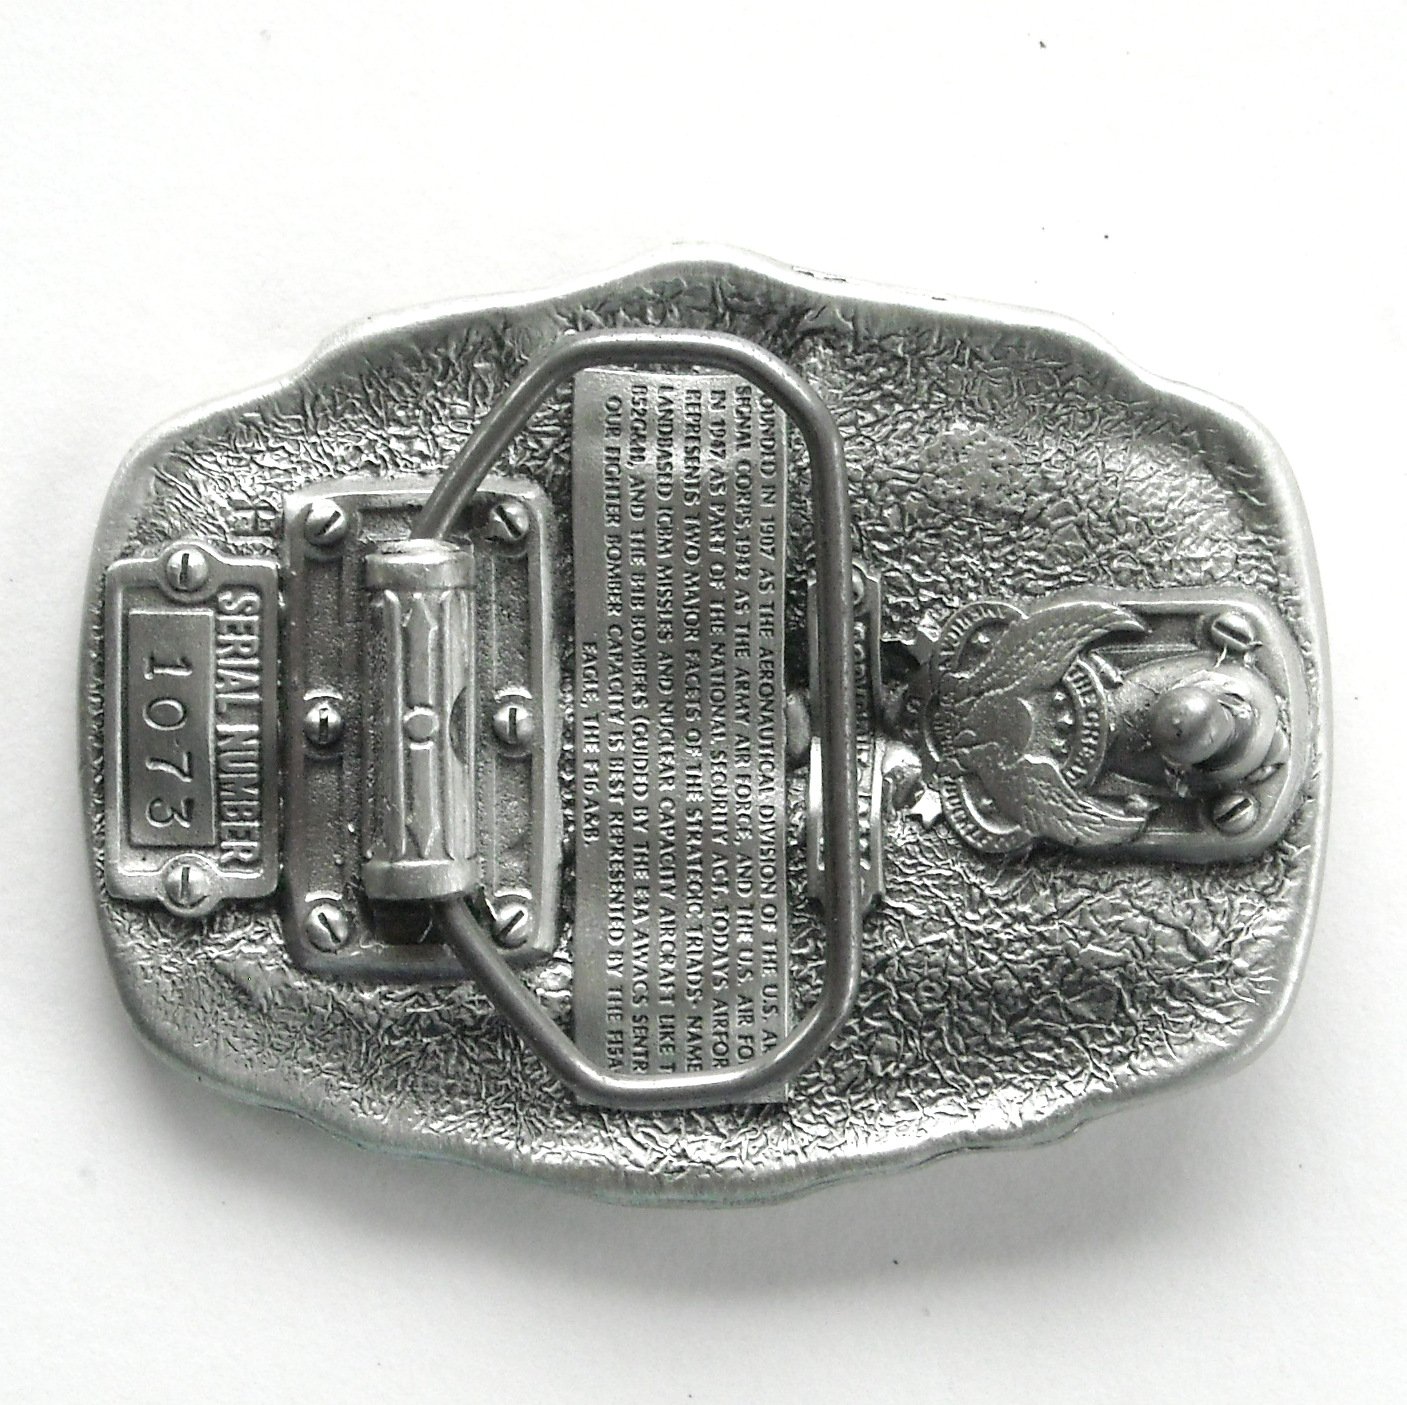 US Air Force Air Superiority USAF Great American Pewter Belt Buckle